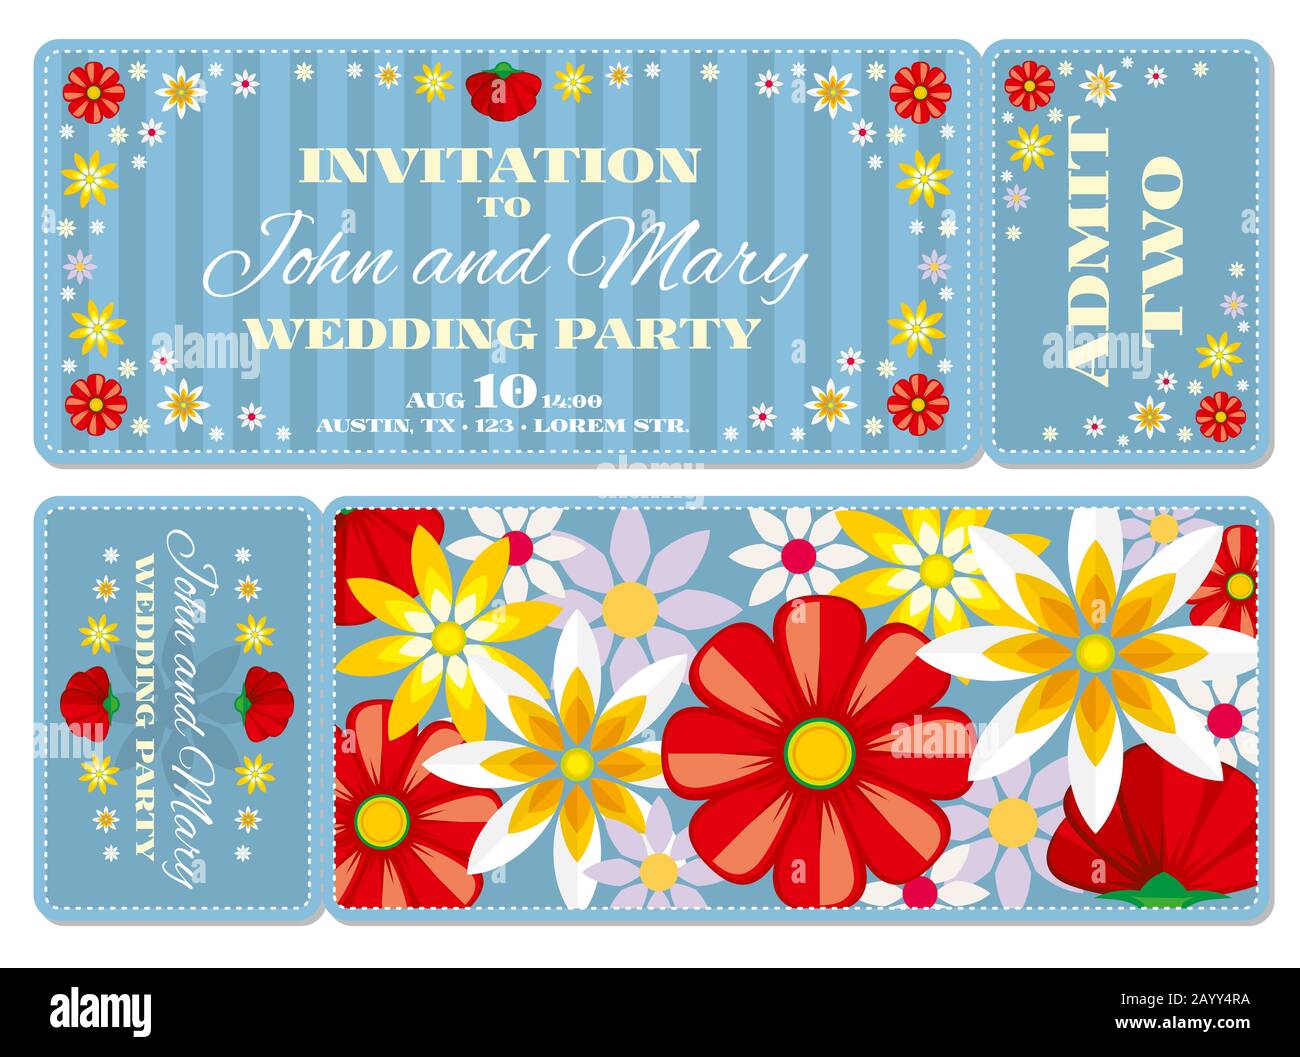 Boarding Pass Invitation Template from c8.alamy.com